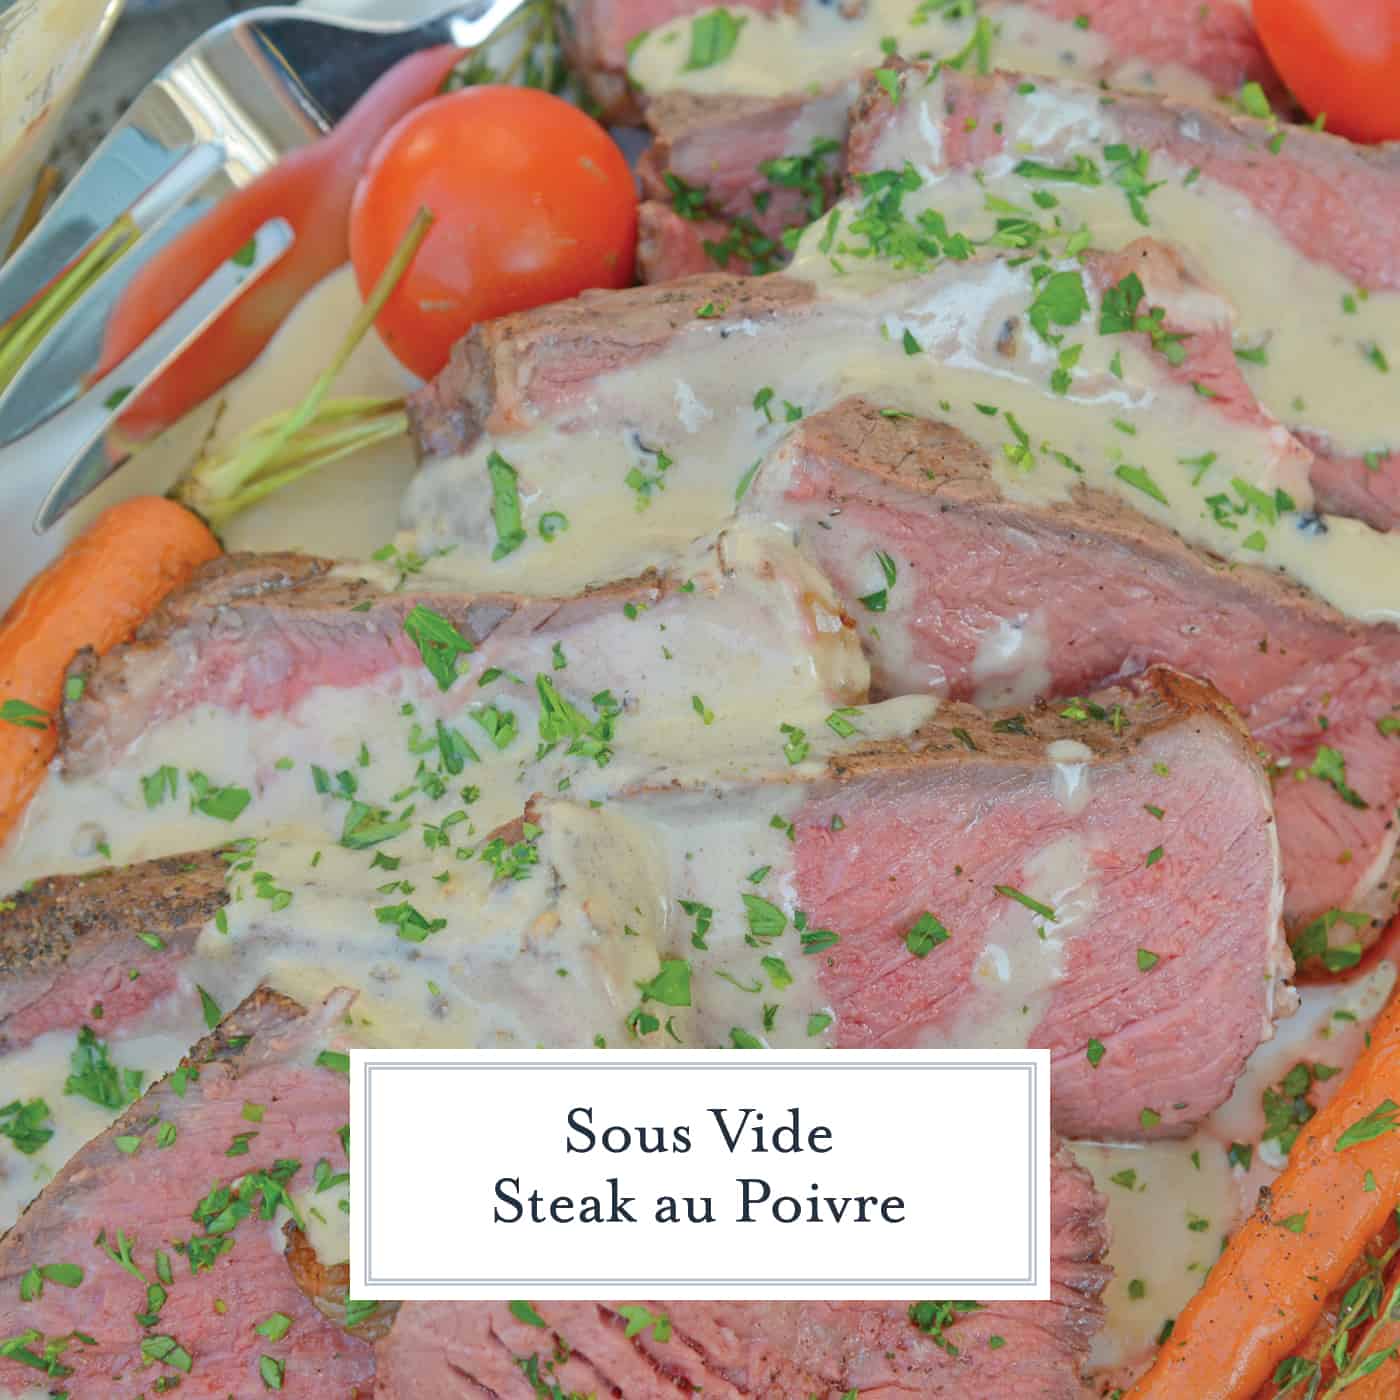 Sous Vide Steak Au Poivre is a sous-vide steak recipe worthy of an easy weeknight meal or a special occasion. New York strip is cooked to the perfect temperature and smothered in a creamy Au Poivre Peppercorn Sauce. #sousvidesteak #steakaupoirve www.savoryexperiments.com 